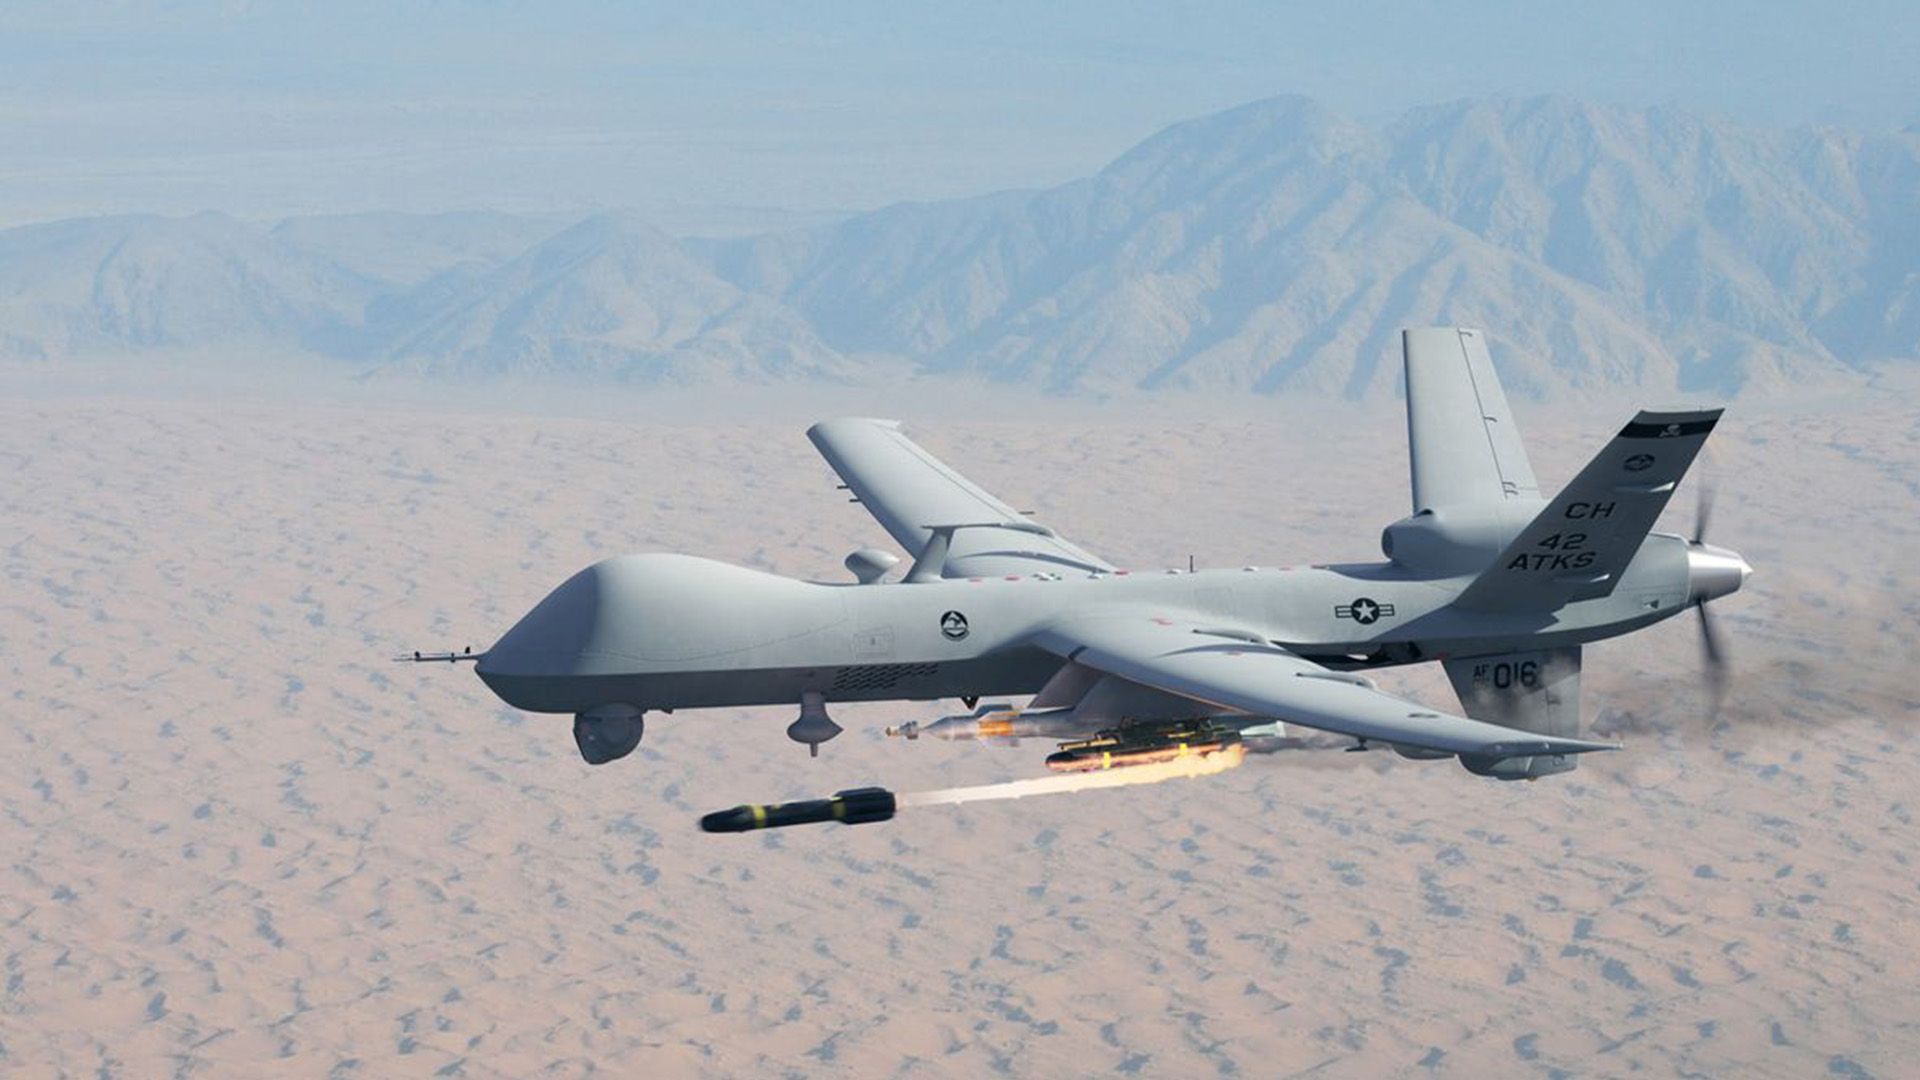  Hellfire missiles are fired from an RAF Reaper drone - Photo Credit: Mirror 